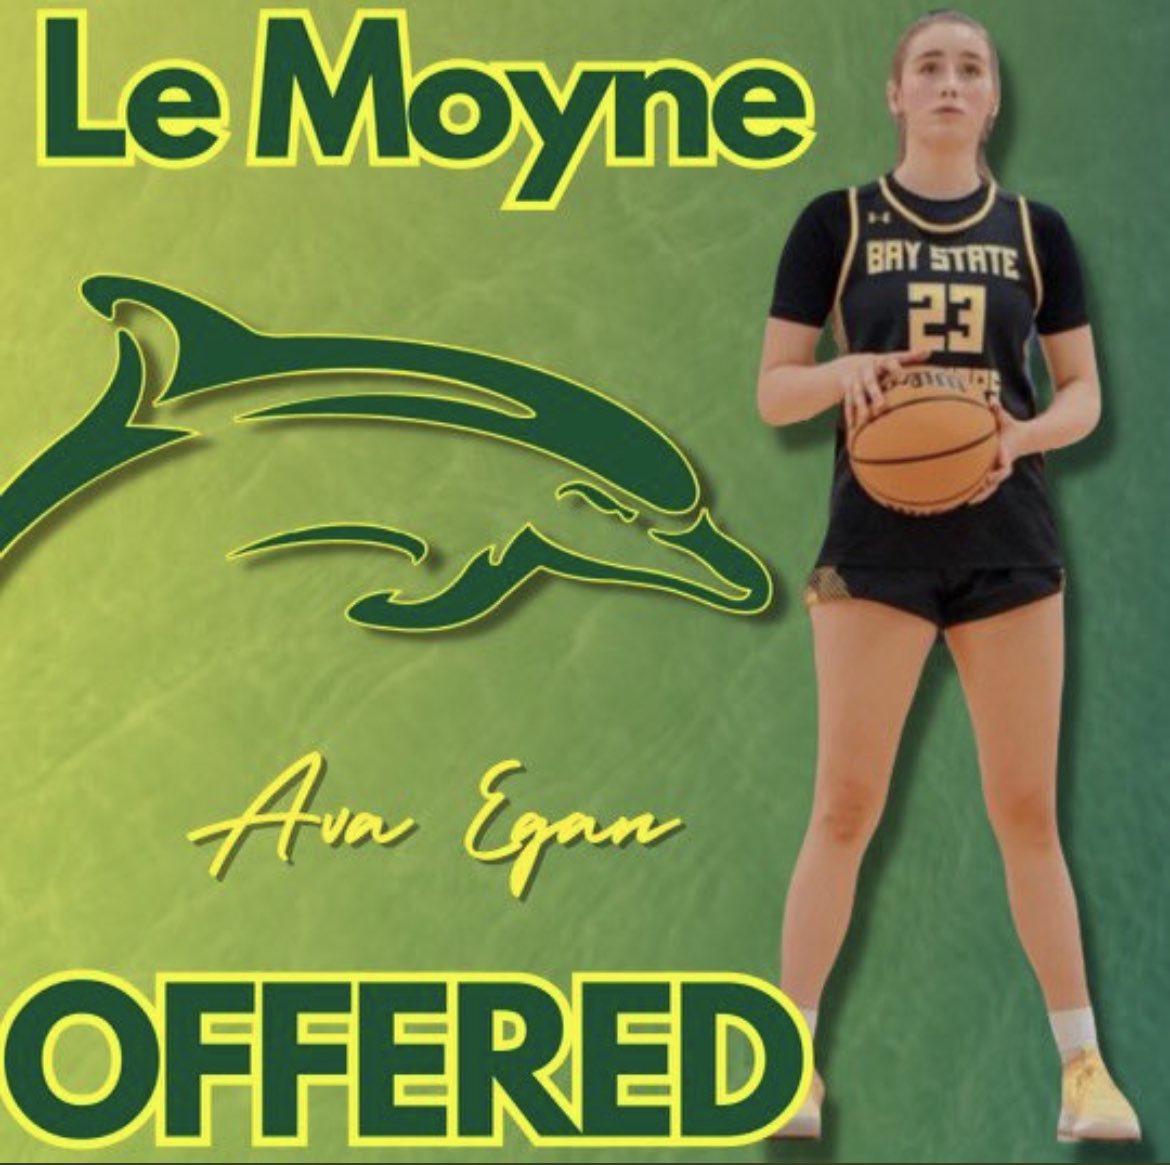 After a great conversation, thank you @CoachMaryG and the entire coaching staff for the offer @LeMoyneWBB. Appreciate this amazing opportunity! 💚💛 @BayStateJags @DXSF_GBBall @LaurieBollin